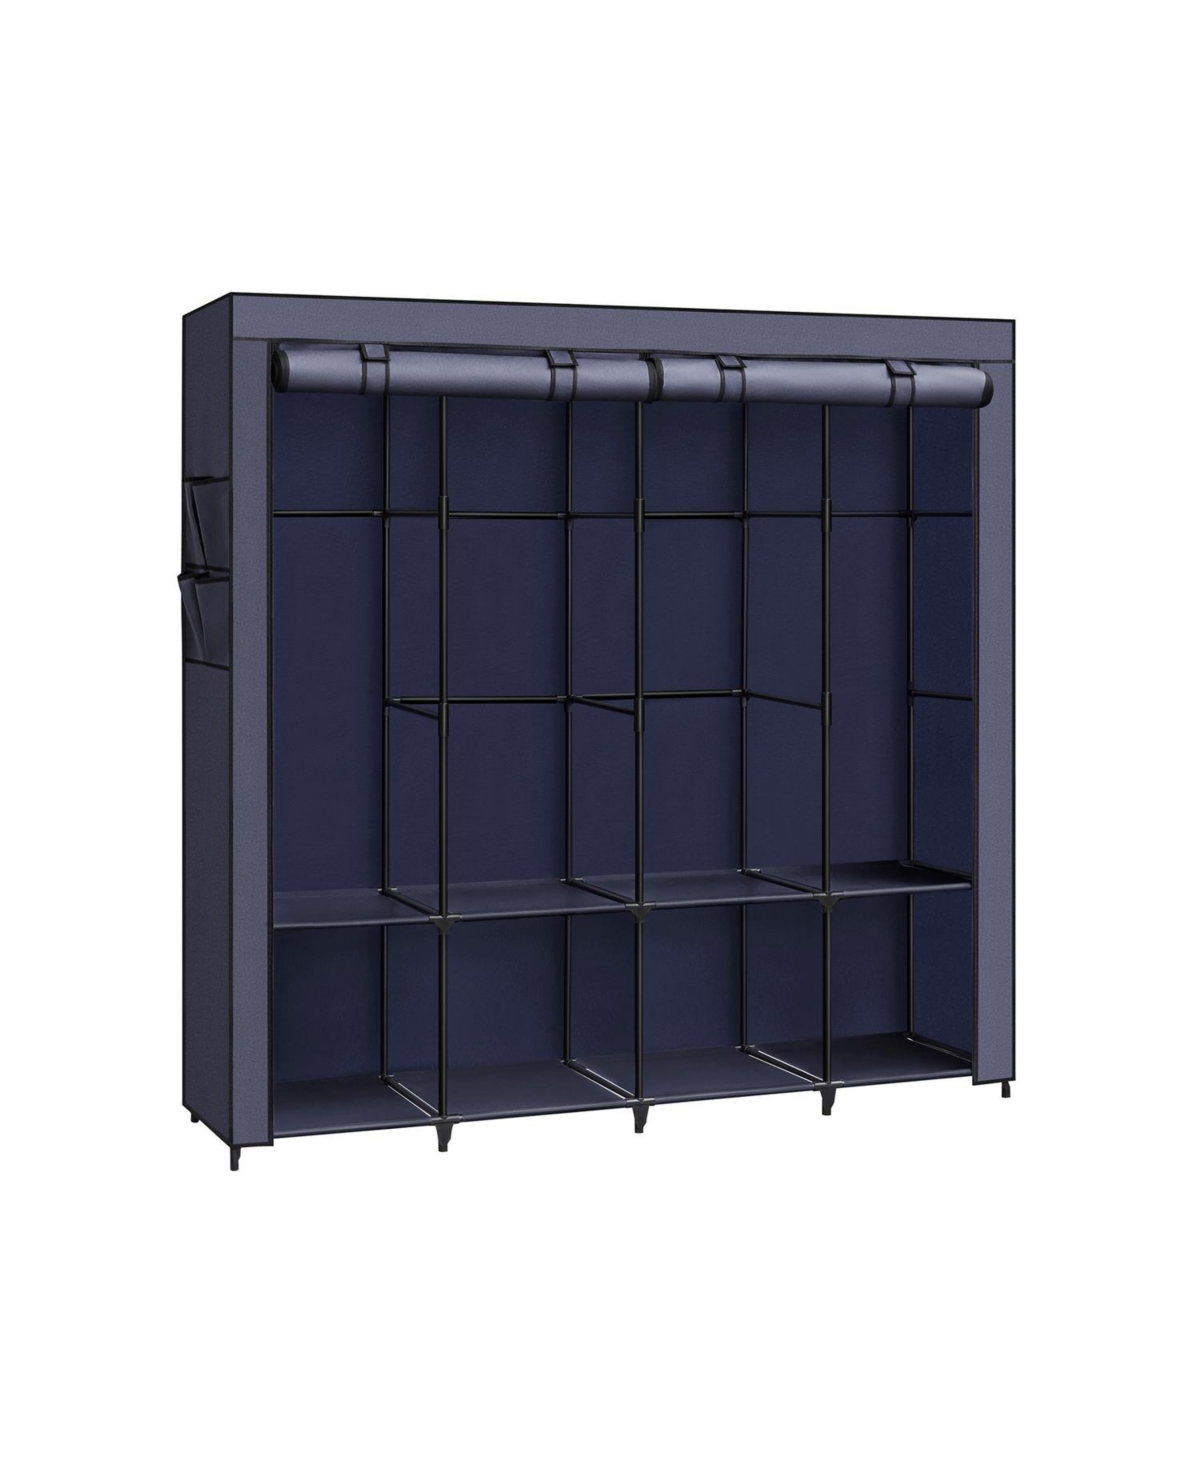 Portable Closet, Wardrobe Closet Organizer With Cover, 3 Hanging Rods And Shelves, 4 Side Pockets - Blue